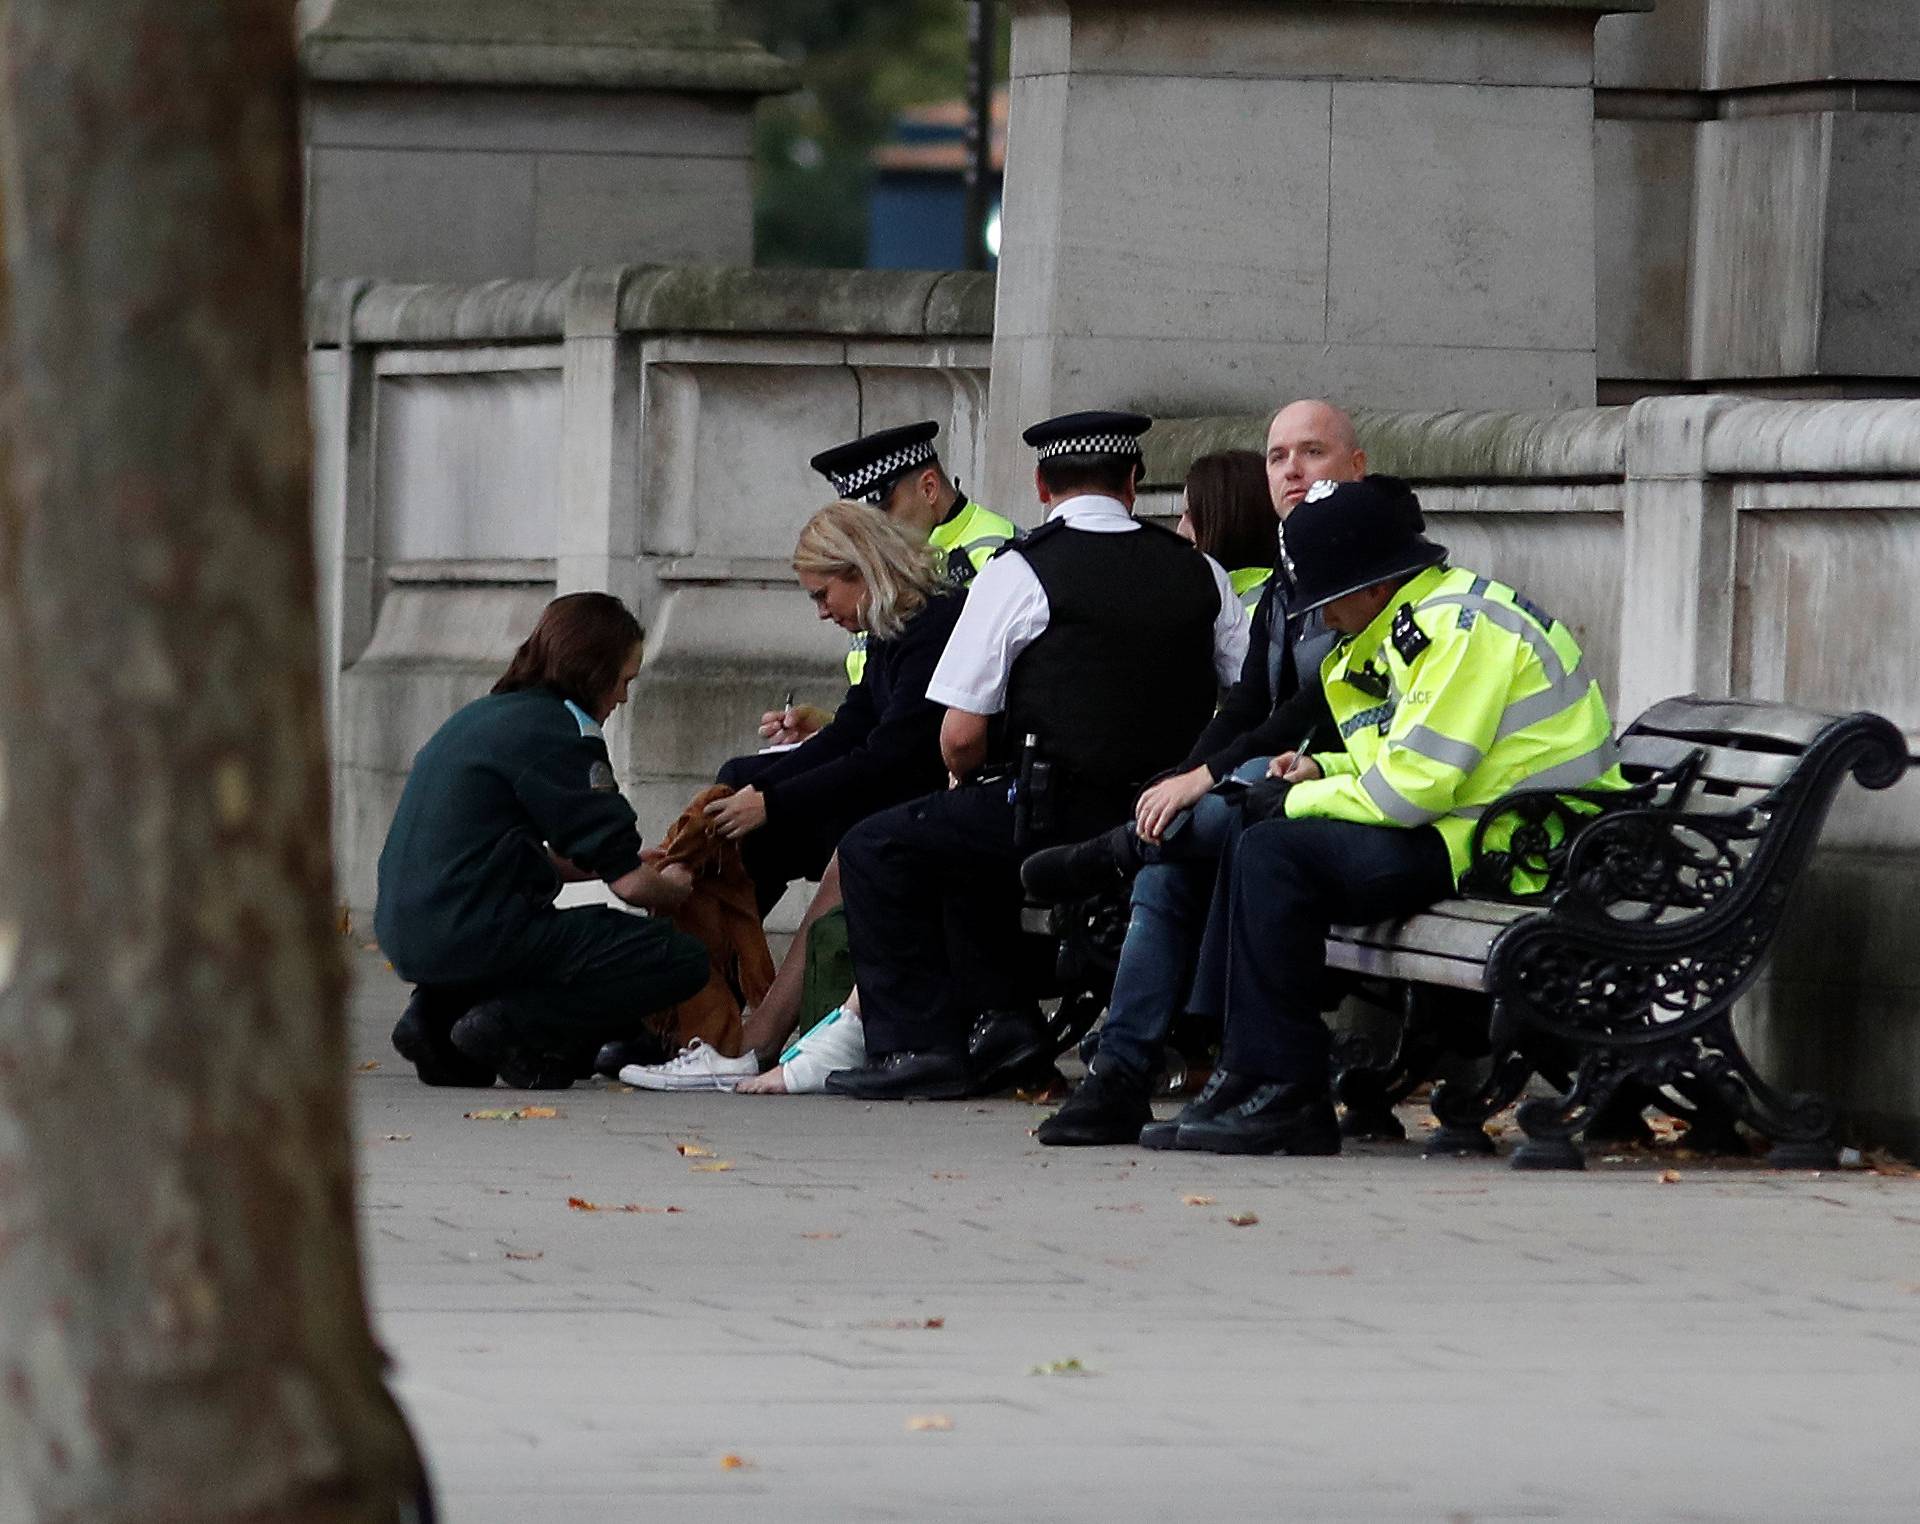 Police officers sit next to a person with a bandaged ankle near the Natural History Museum, after a car mounted the pavement, in London